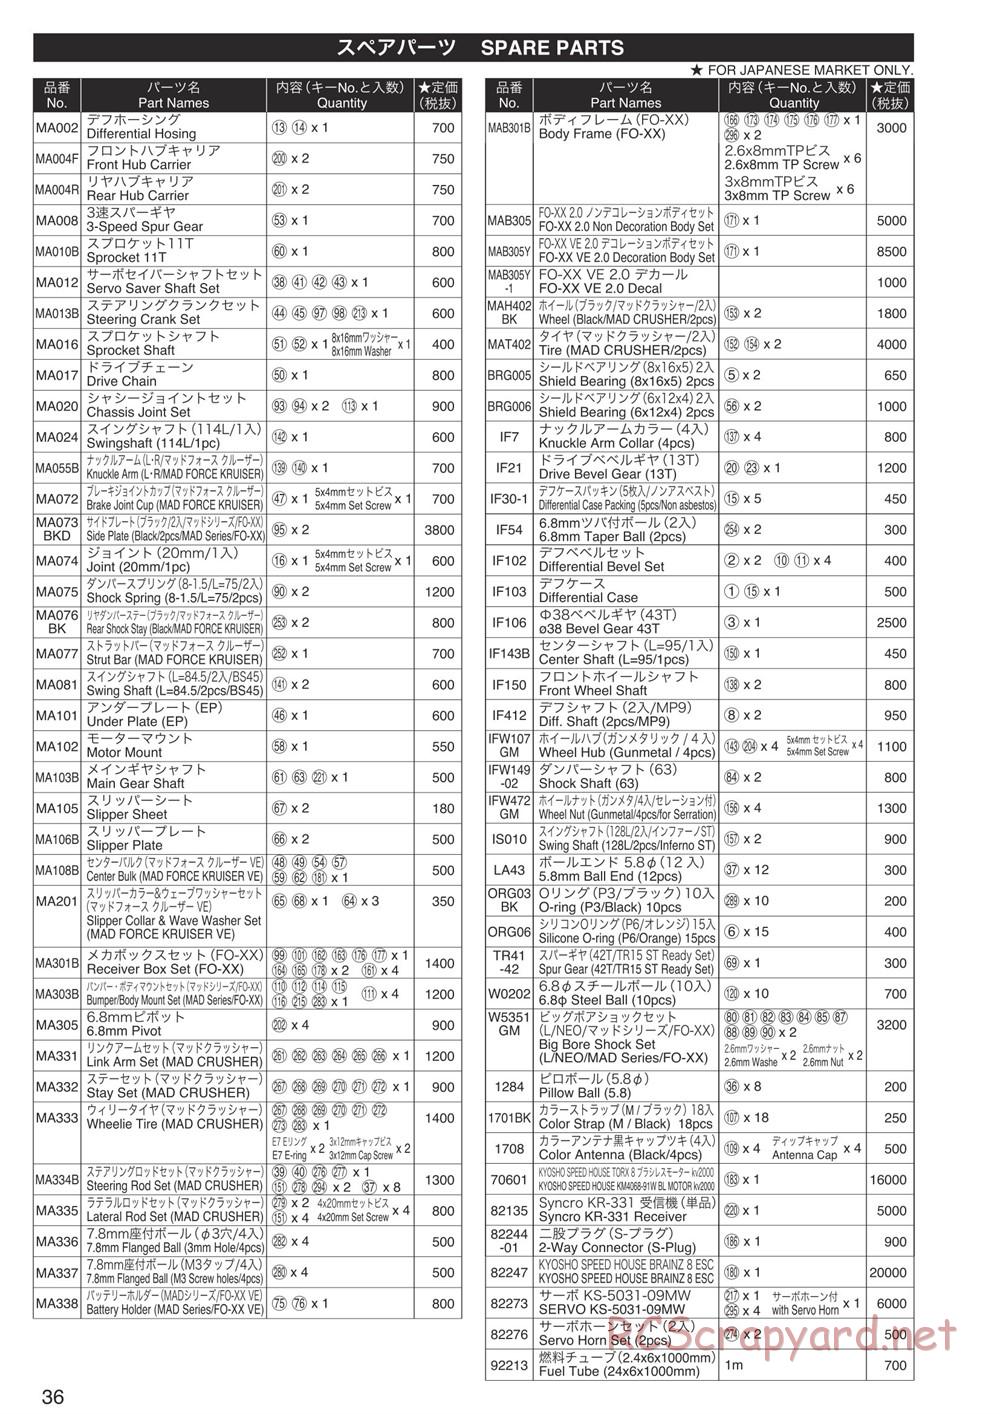 Kyosho - FO-XX VE 2.0 - Manual - Page 35